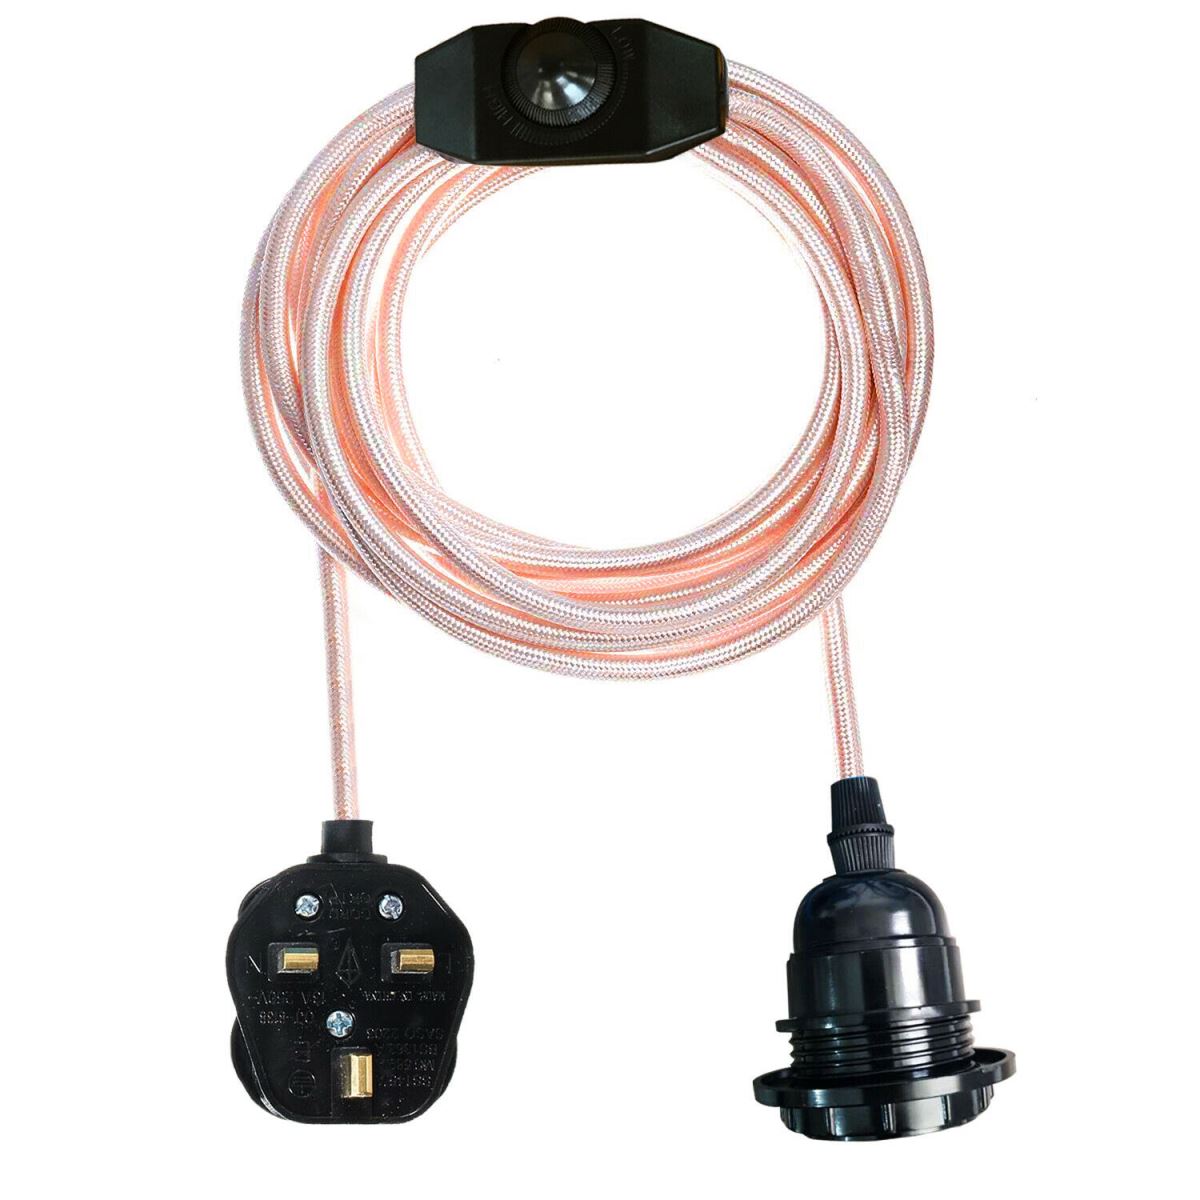 Rose Gold Color Dimmer Switch 4m Fabric Flex Cable Plug In Pendant Lamp E27 Holder - Vintagelite